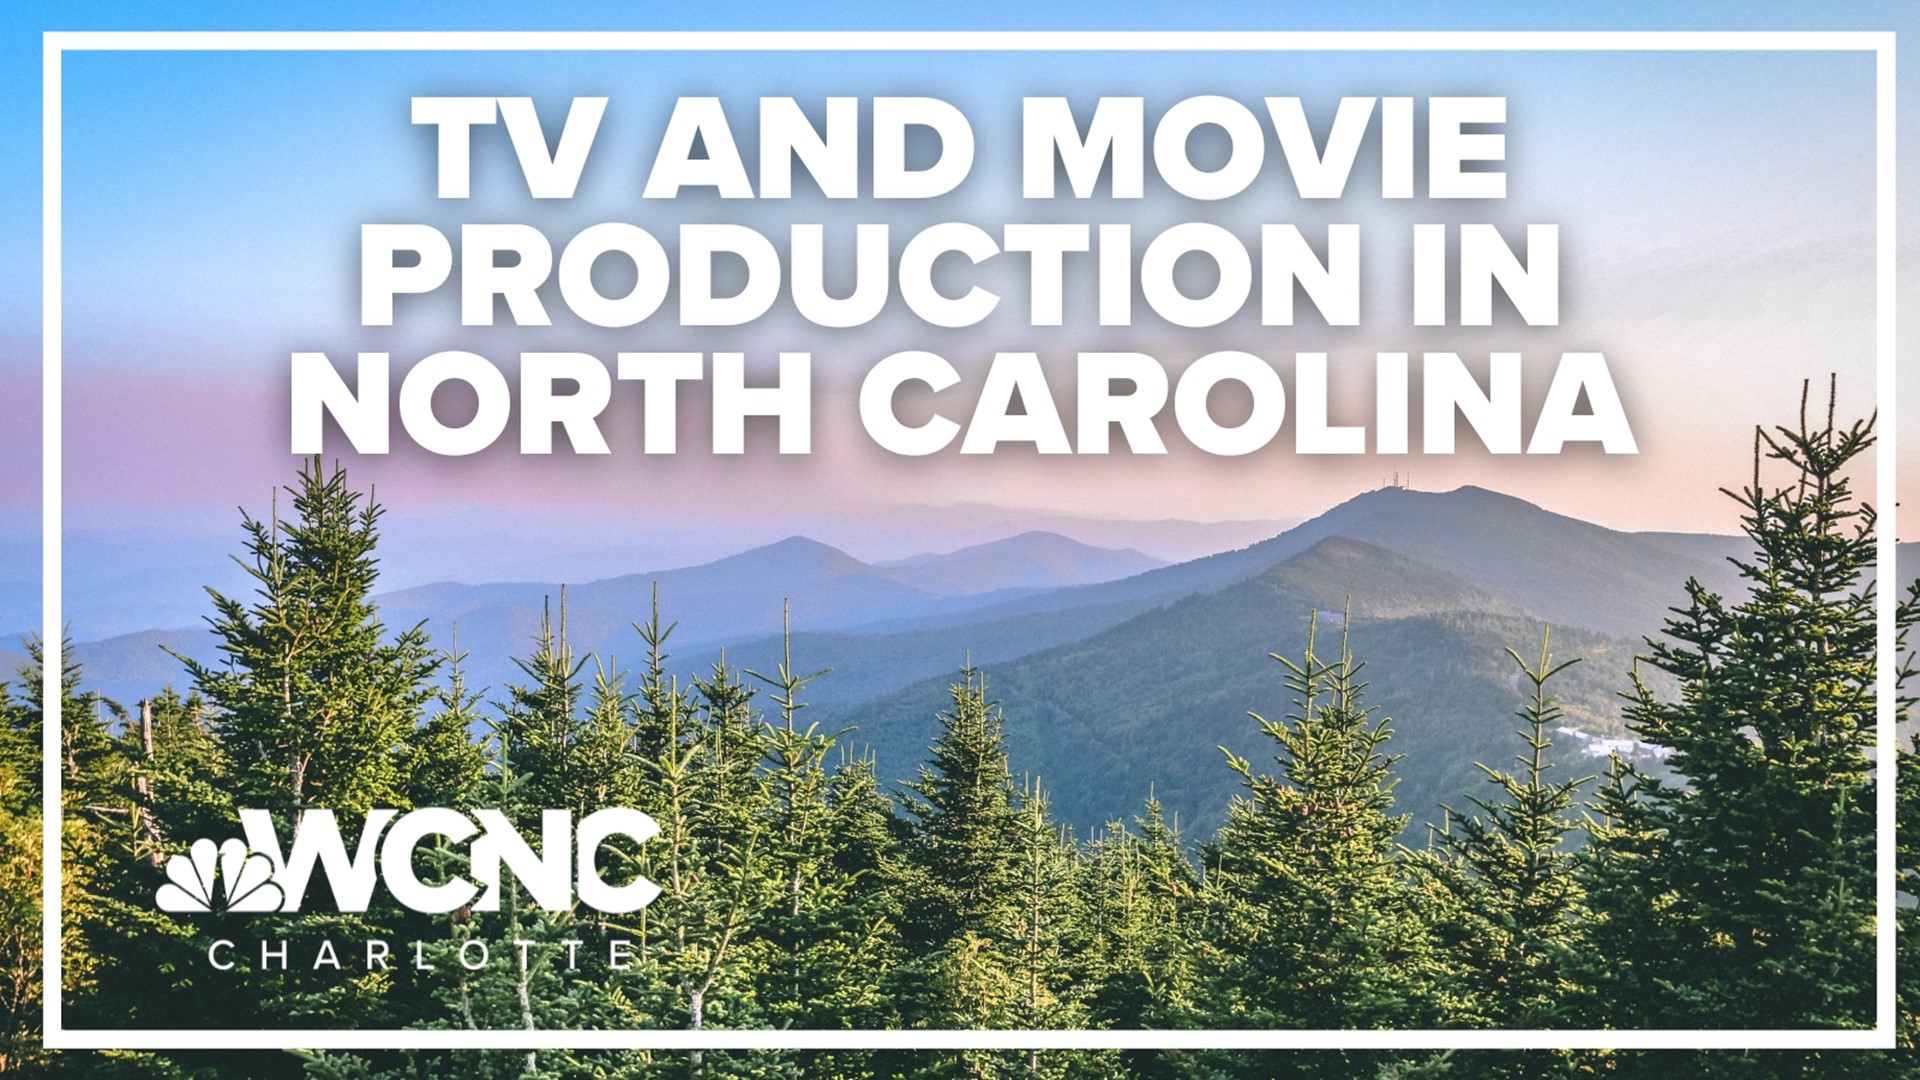 Television and movie producers spent more than $258 million in North Carolina last year, creating thousands of jobs in the process.